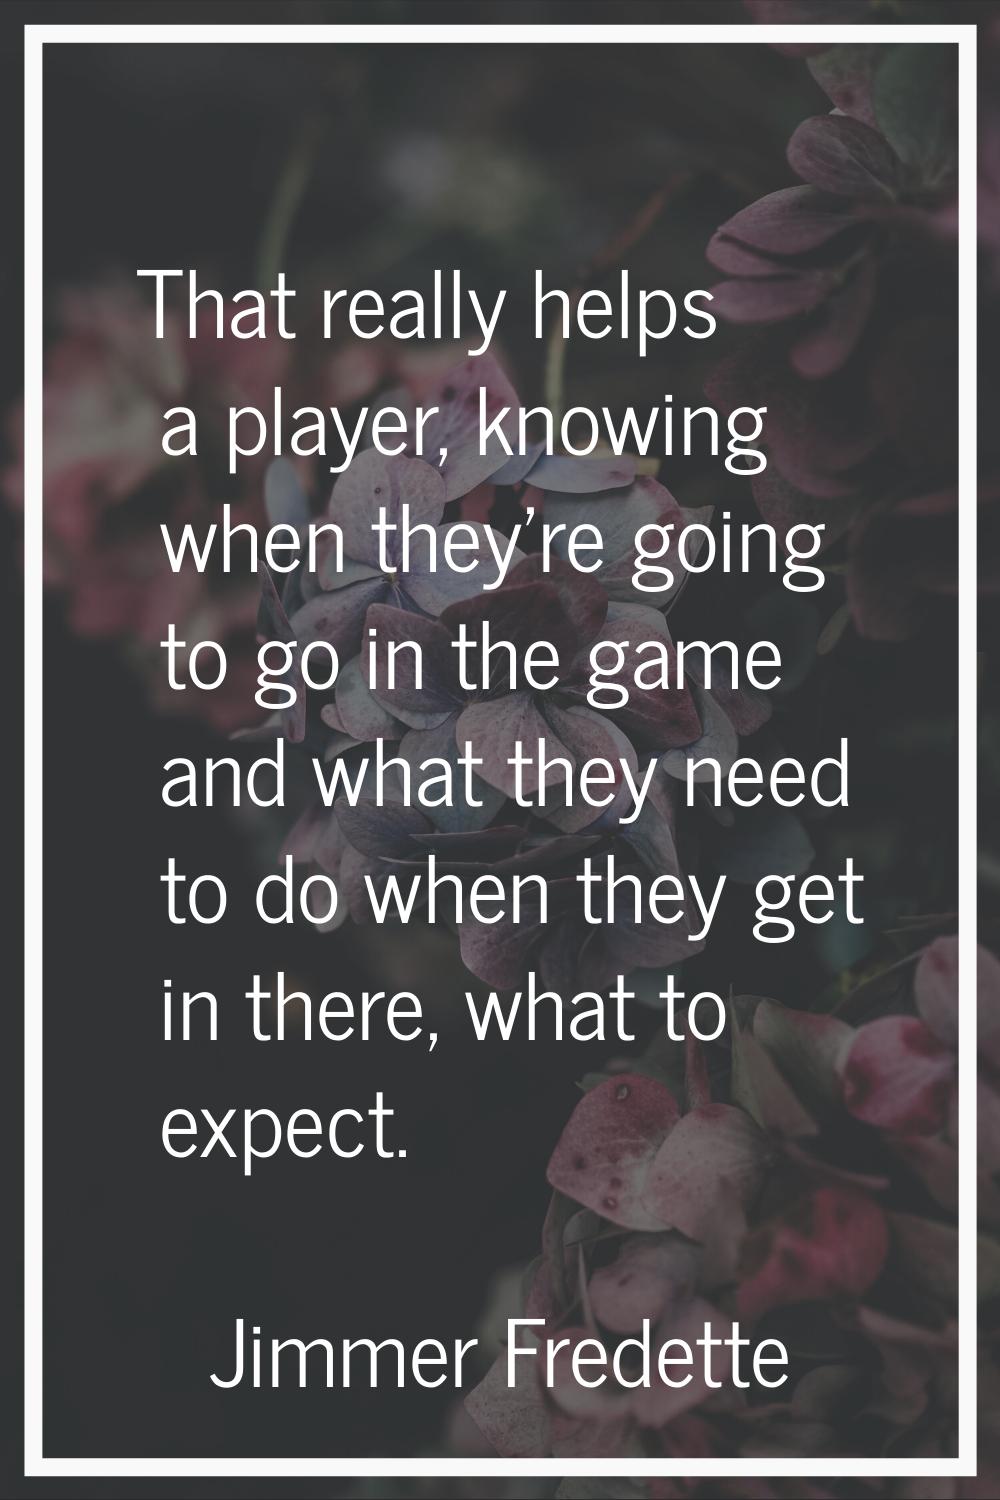 That really helps a player, knowing when they're going to go in the game and what they need to do w